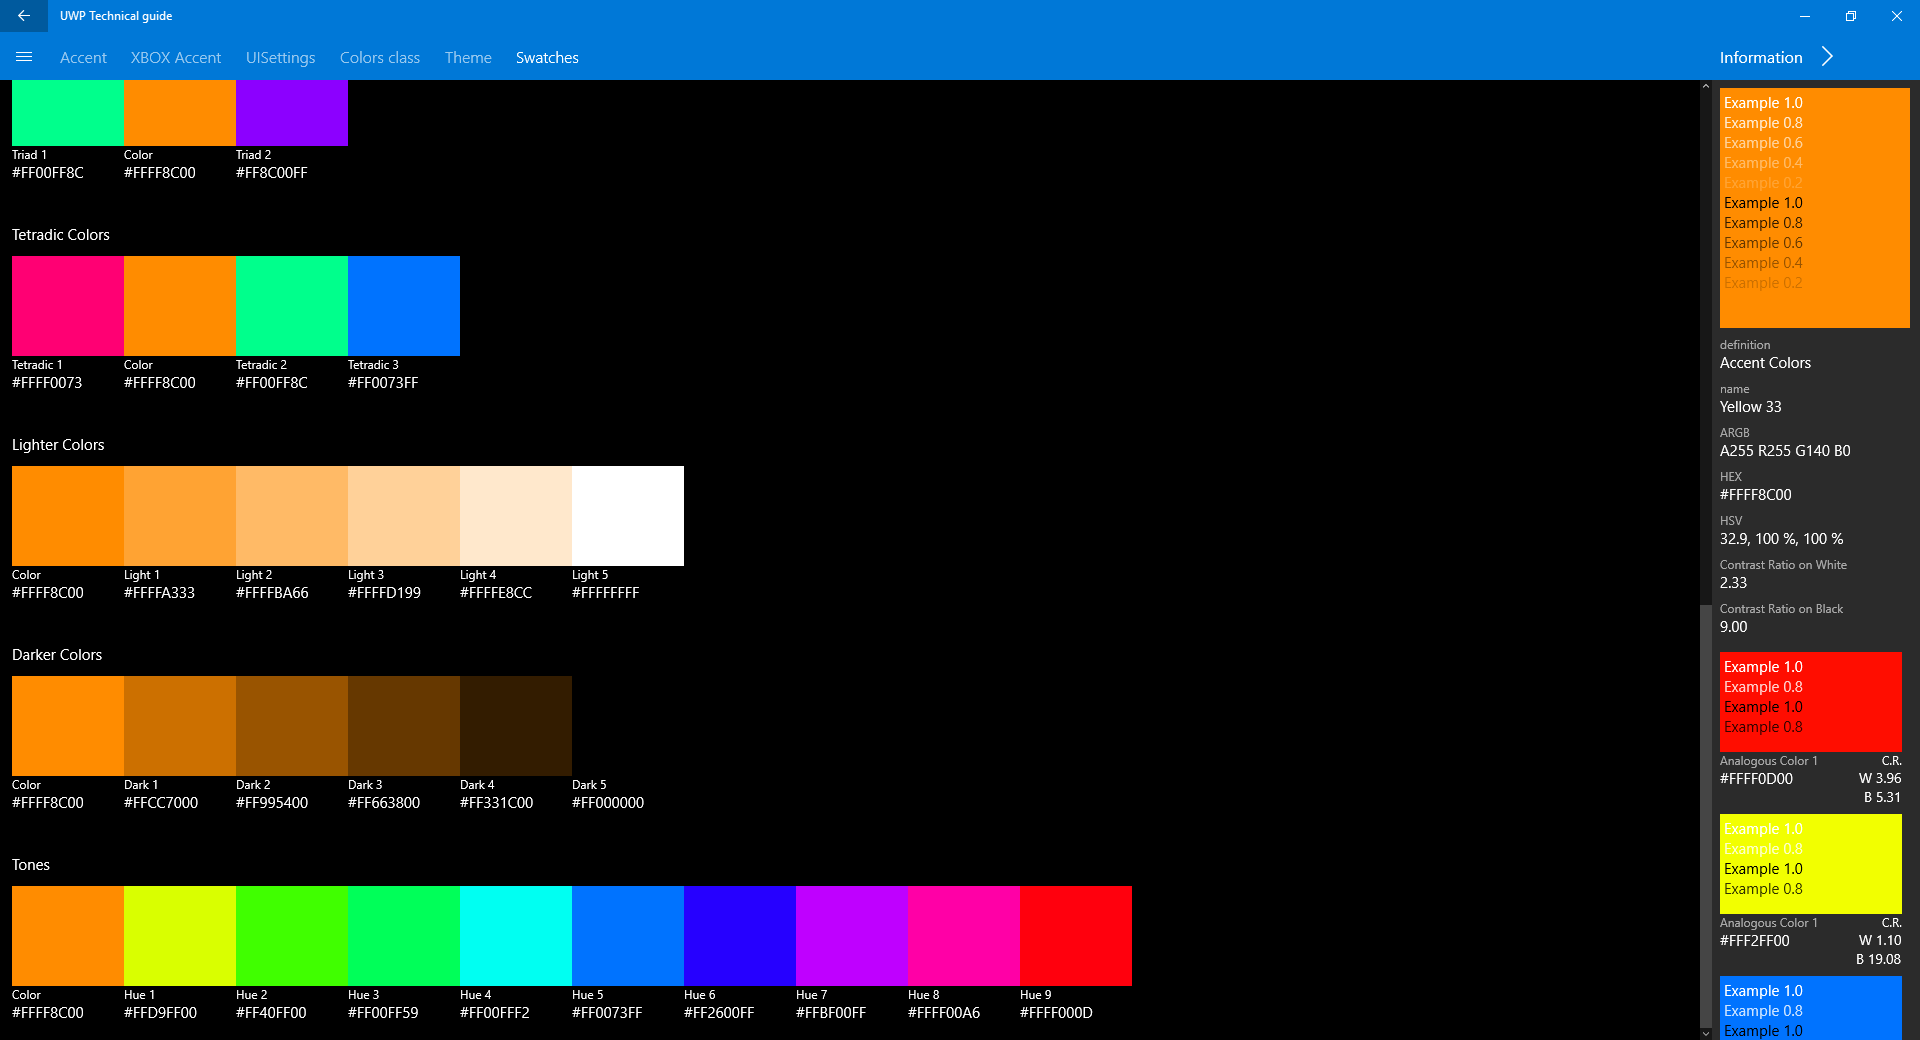 Includes a Color Picker to generate dynamic palettes for your Apps.